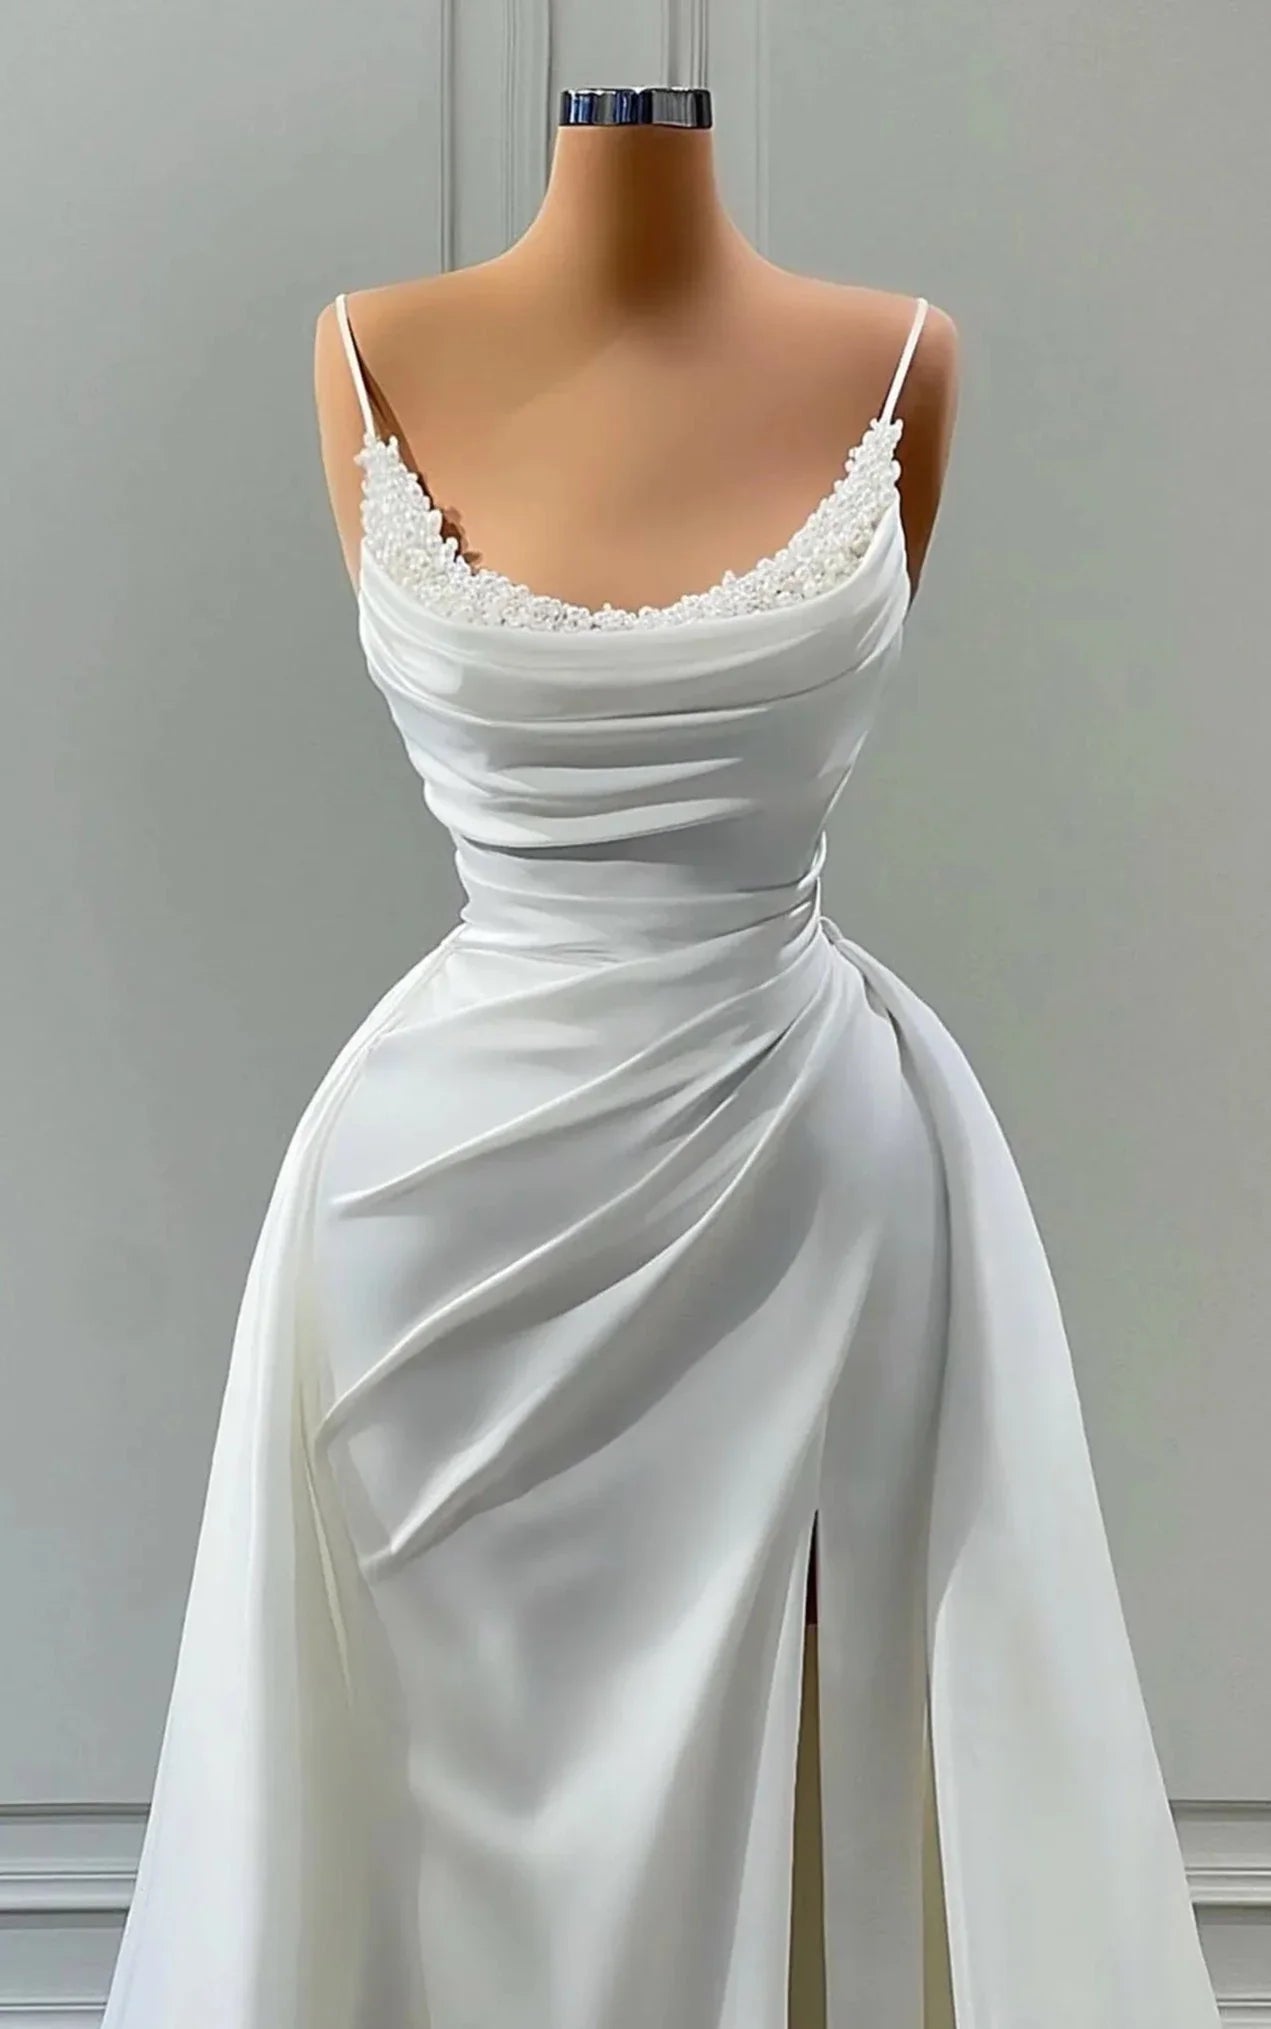 Wedding Dresses For Bridesmaid, Beautiful White Long A-line Spaghetti Straps Wedding Dresses With Beads